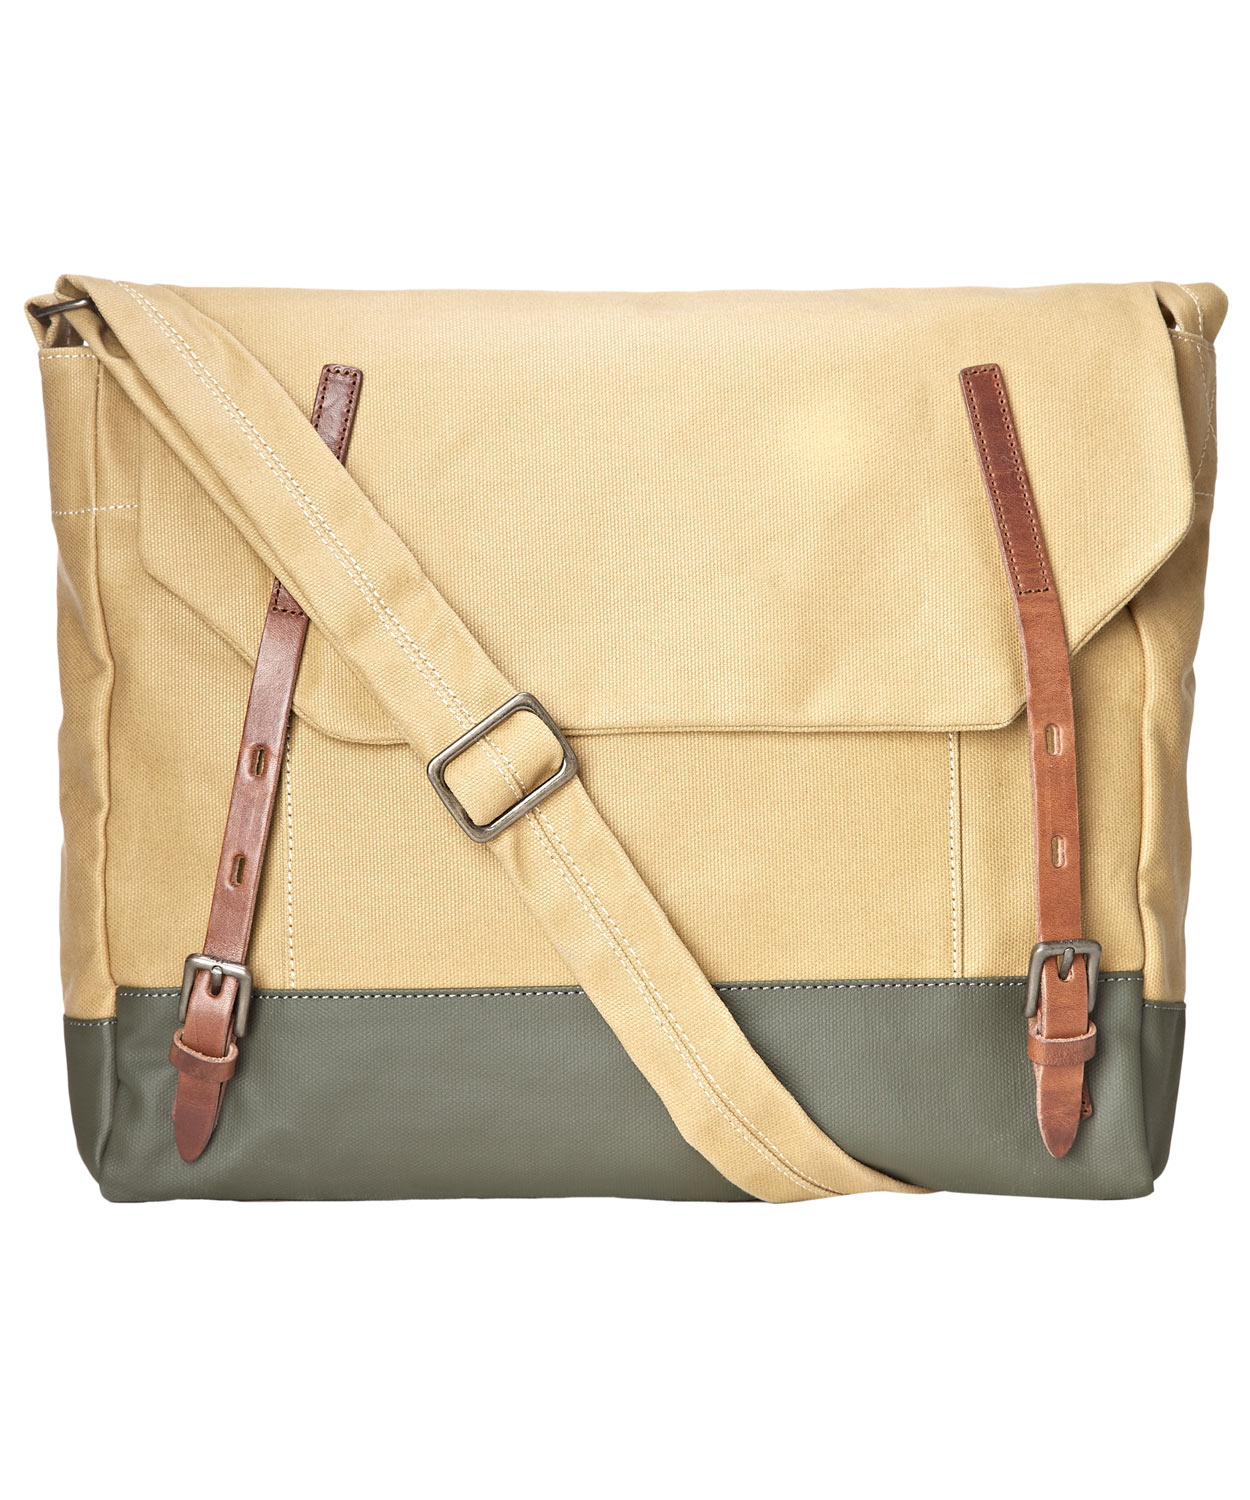 Lyst - Ally Capellino Beige Danny Waxed Canvas Messenger Bag in Natural for Men